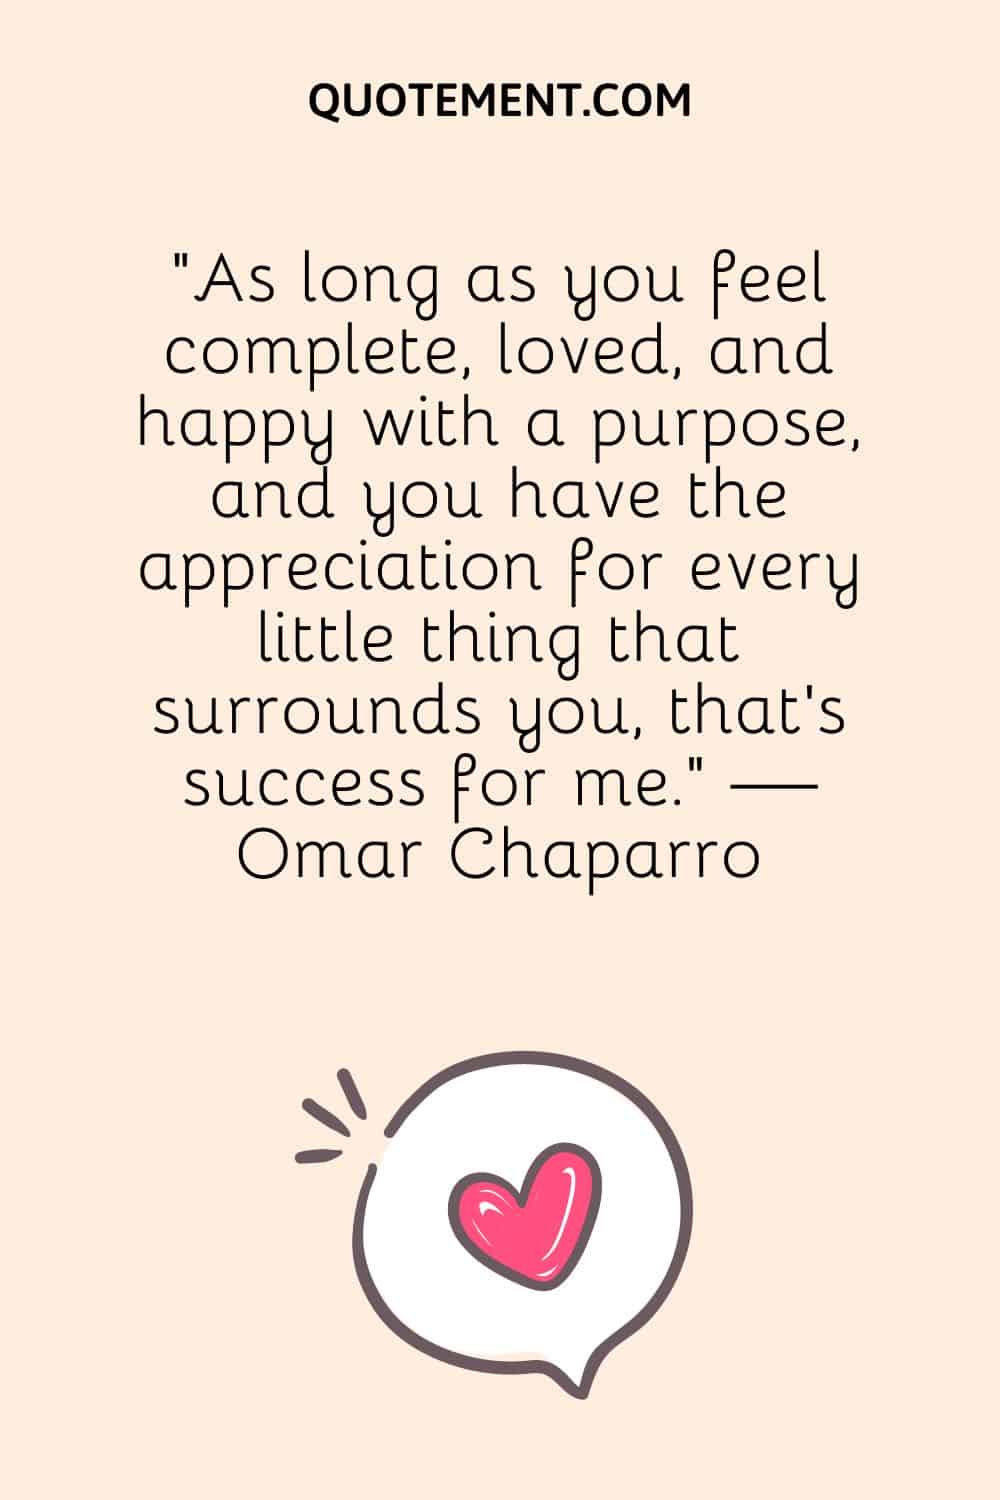 As long as you feel complete, loved, and happy with a purpose, and you have the appreciation for every little thing that surrounds you, that’s success for me